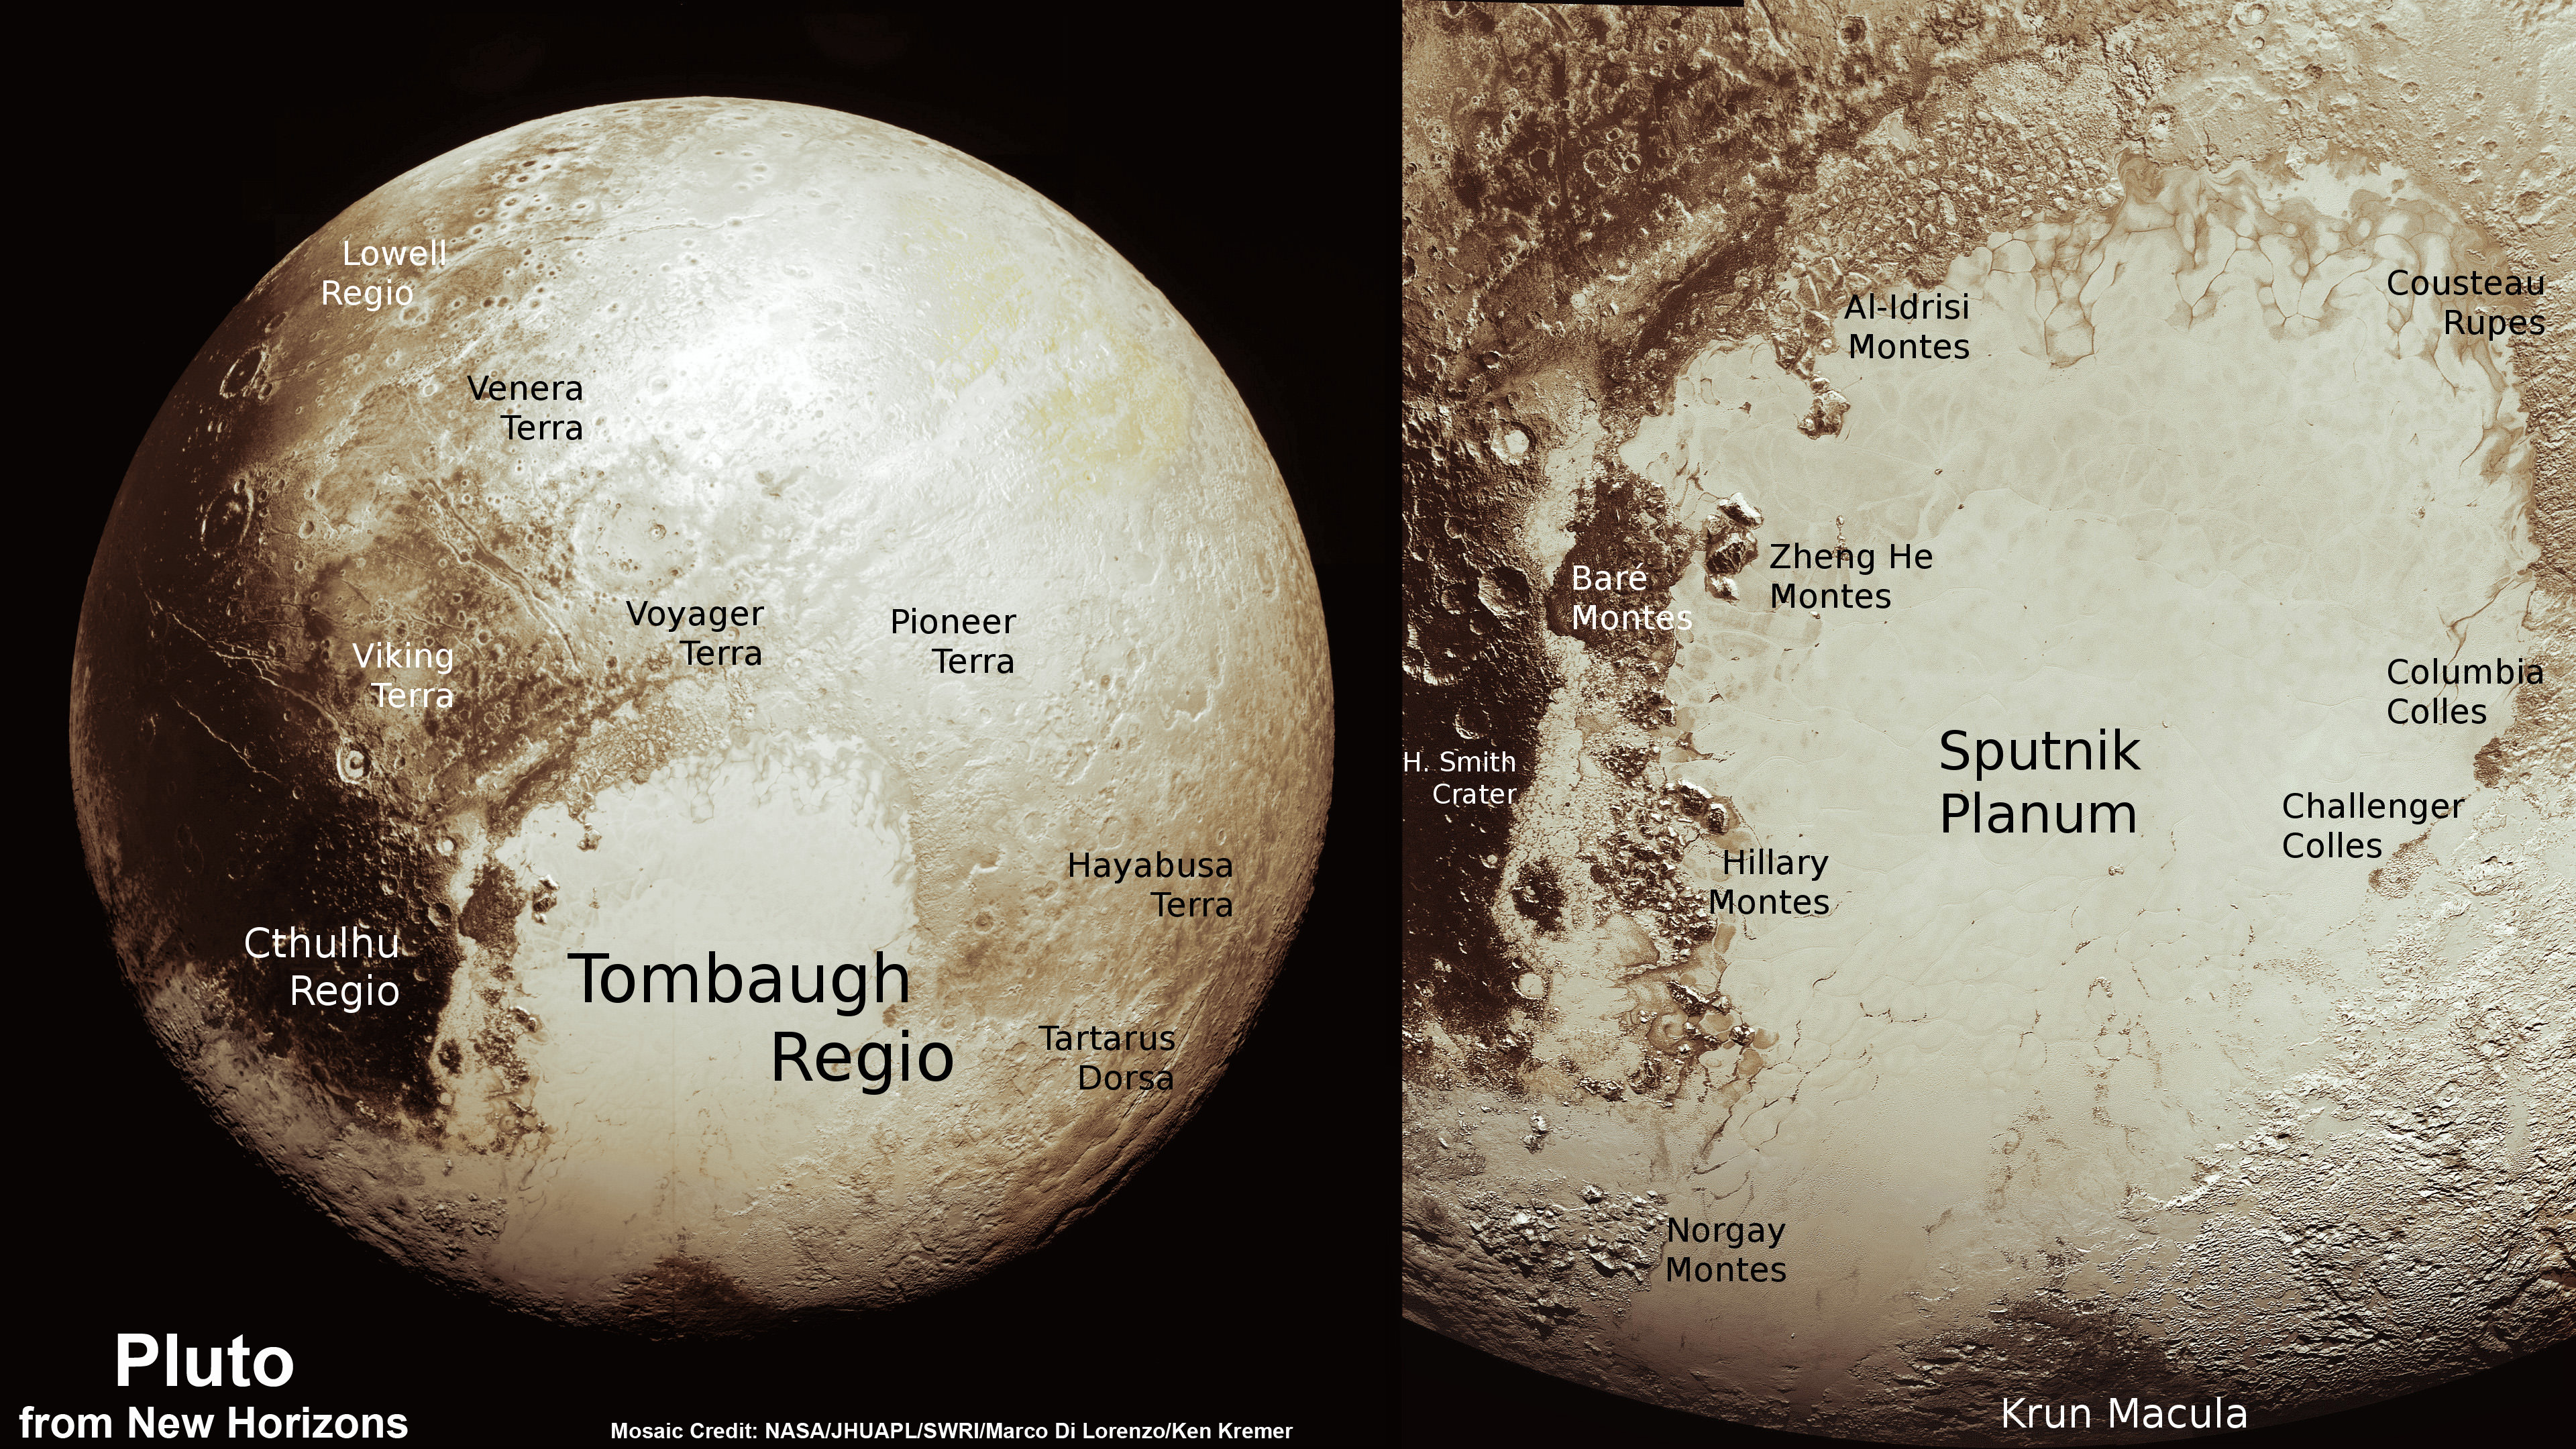 real pluto planet pictures